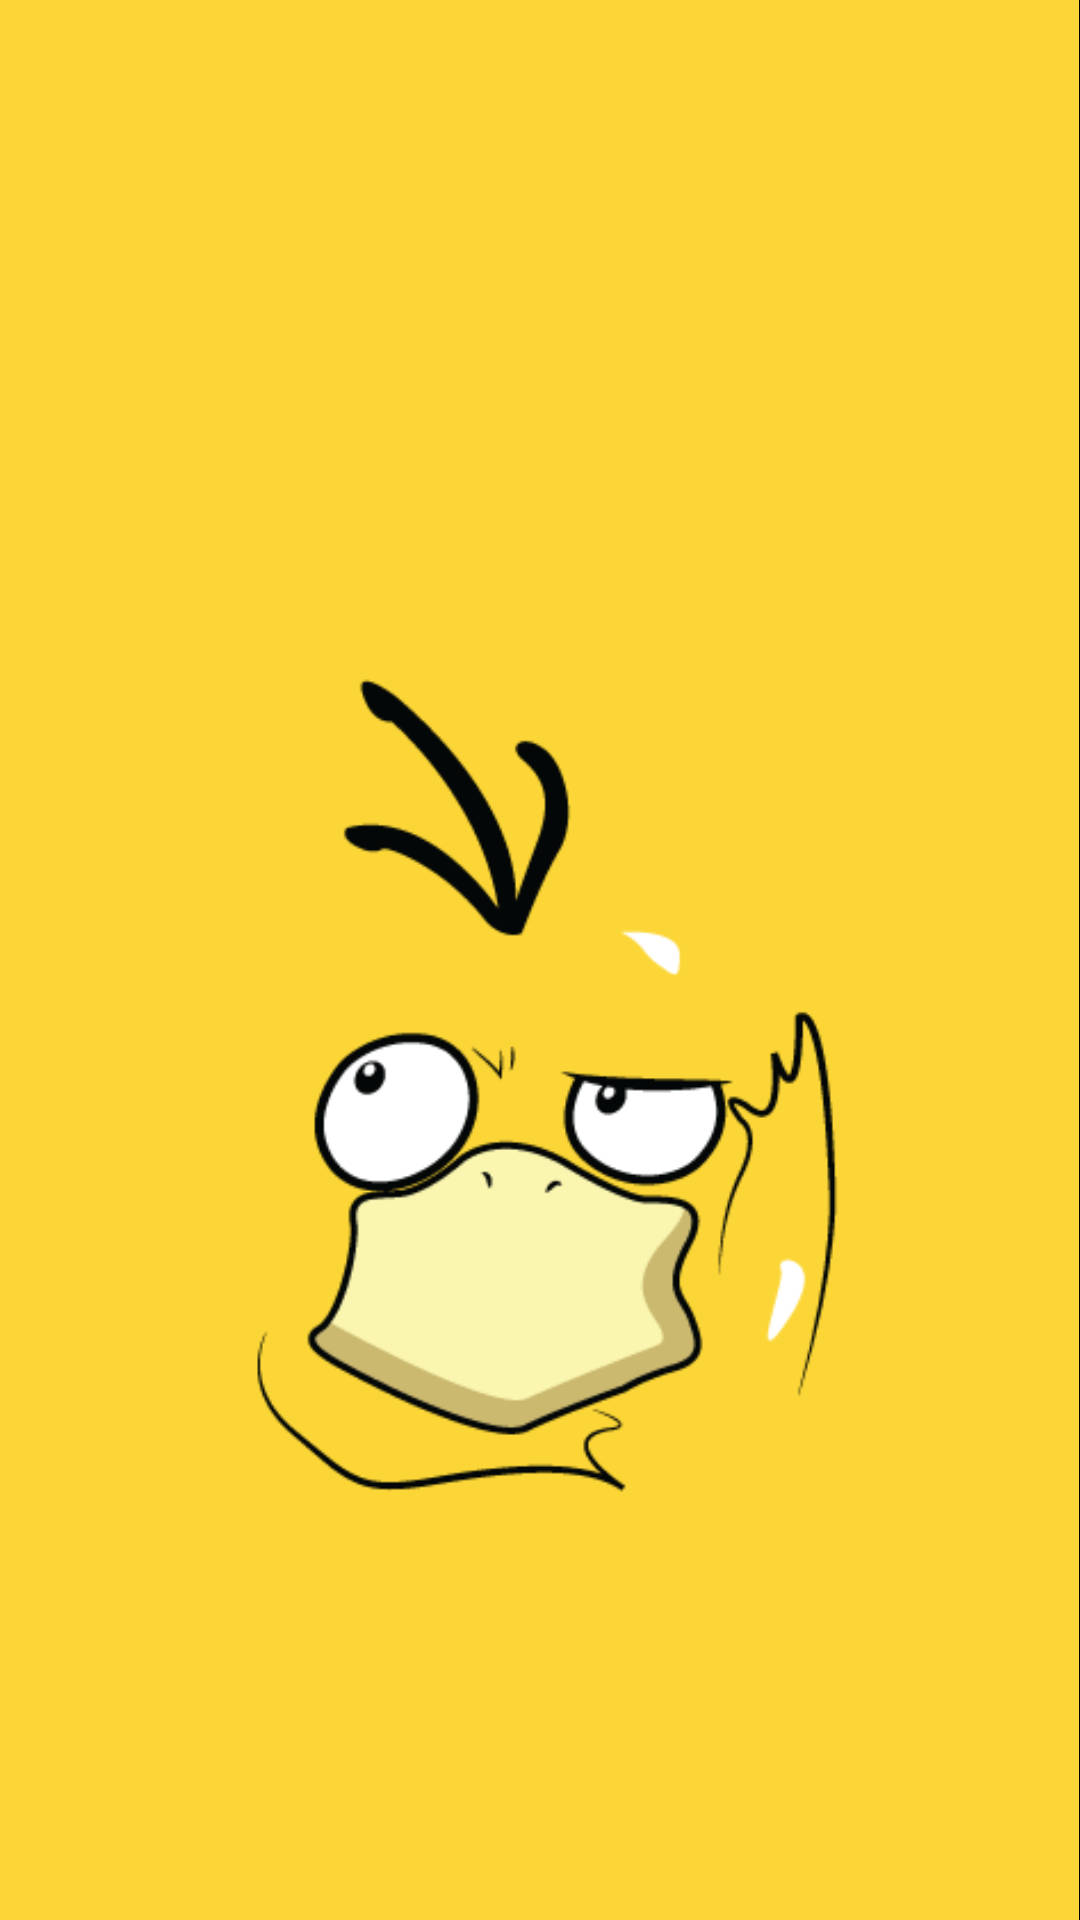 Feeling Annoyed? Psyduck Can Relate! Background